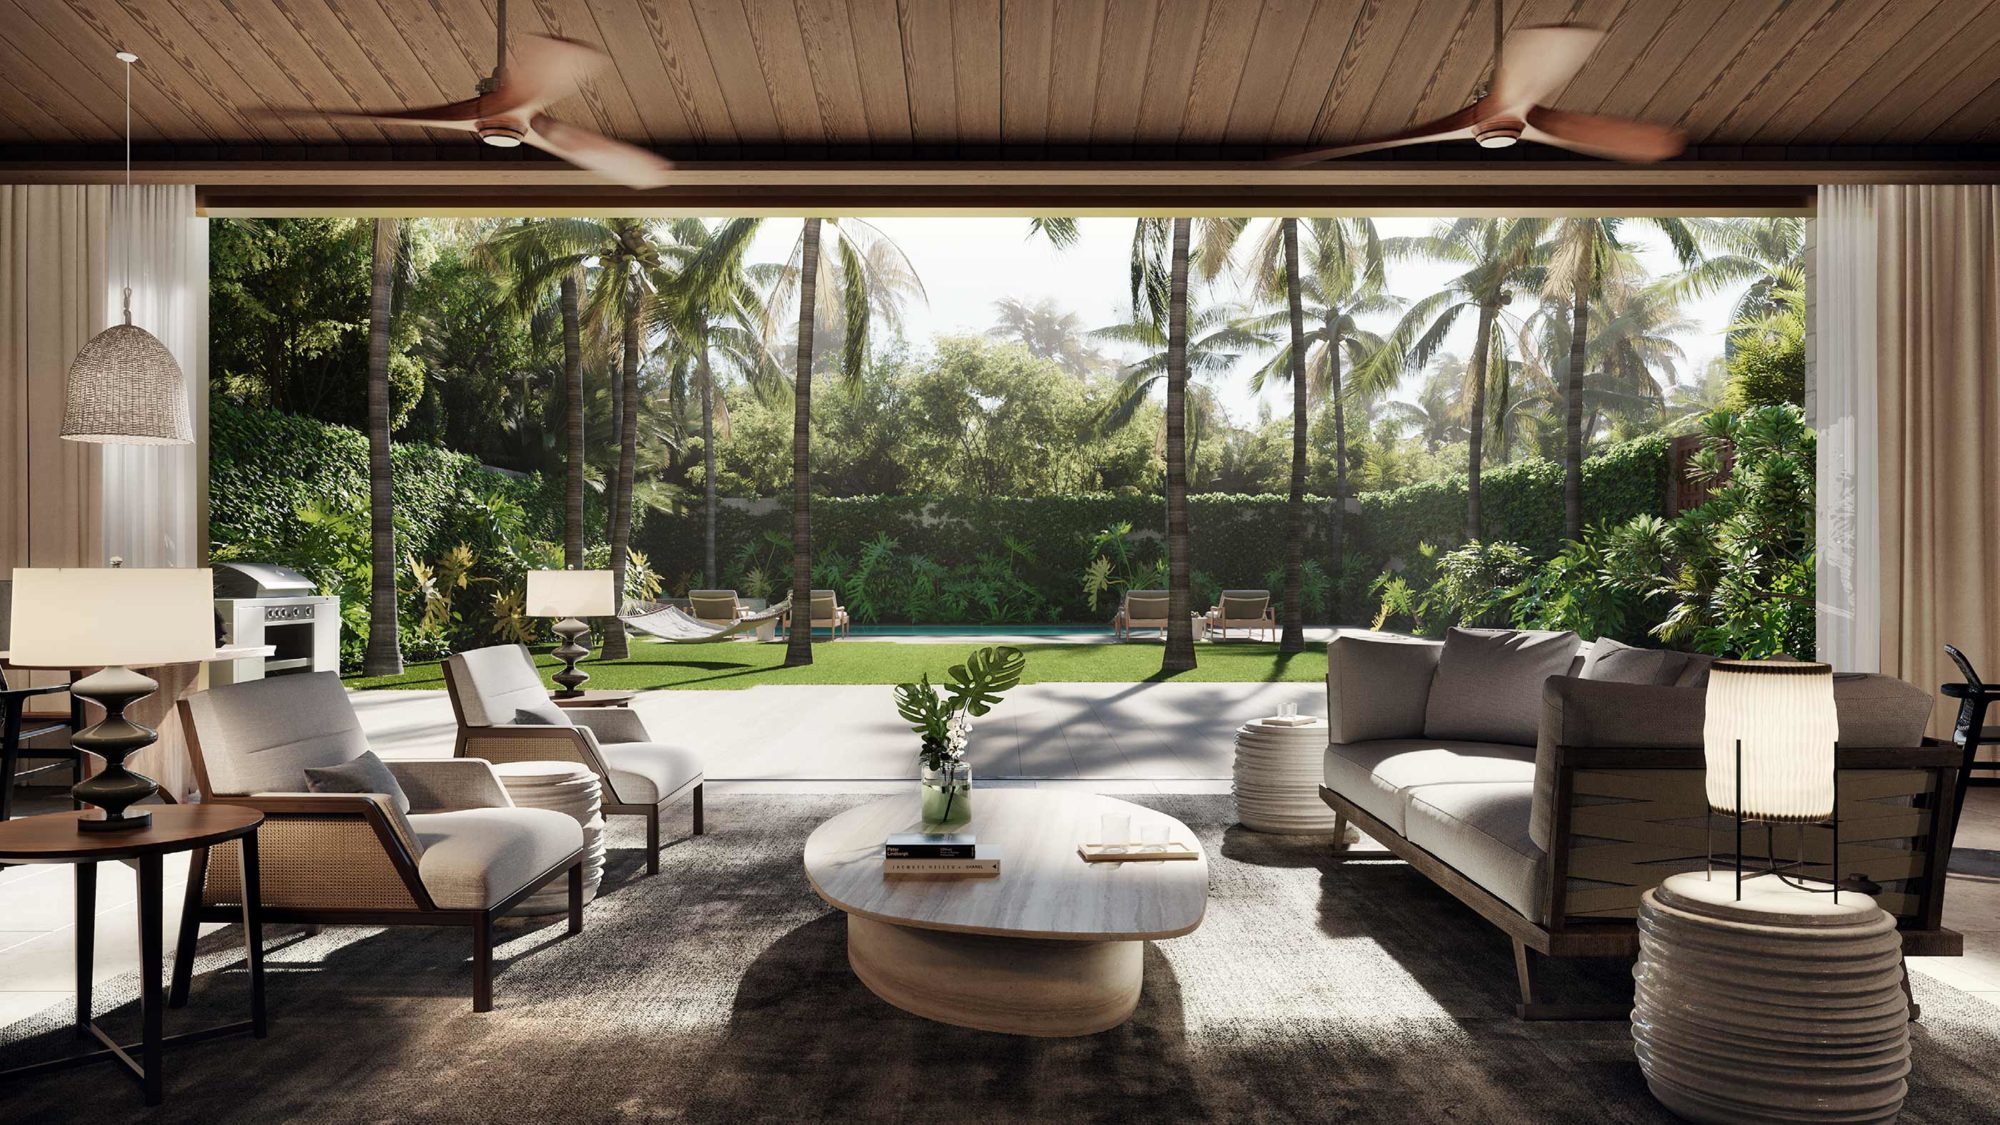 The indoor seating in the Lauhala Pool House amenity space